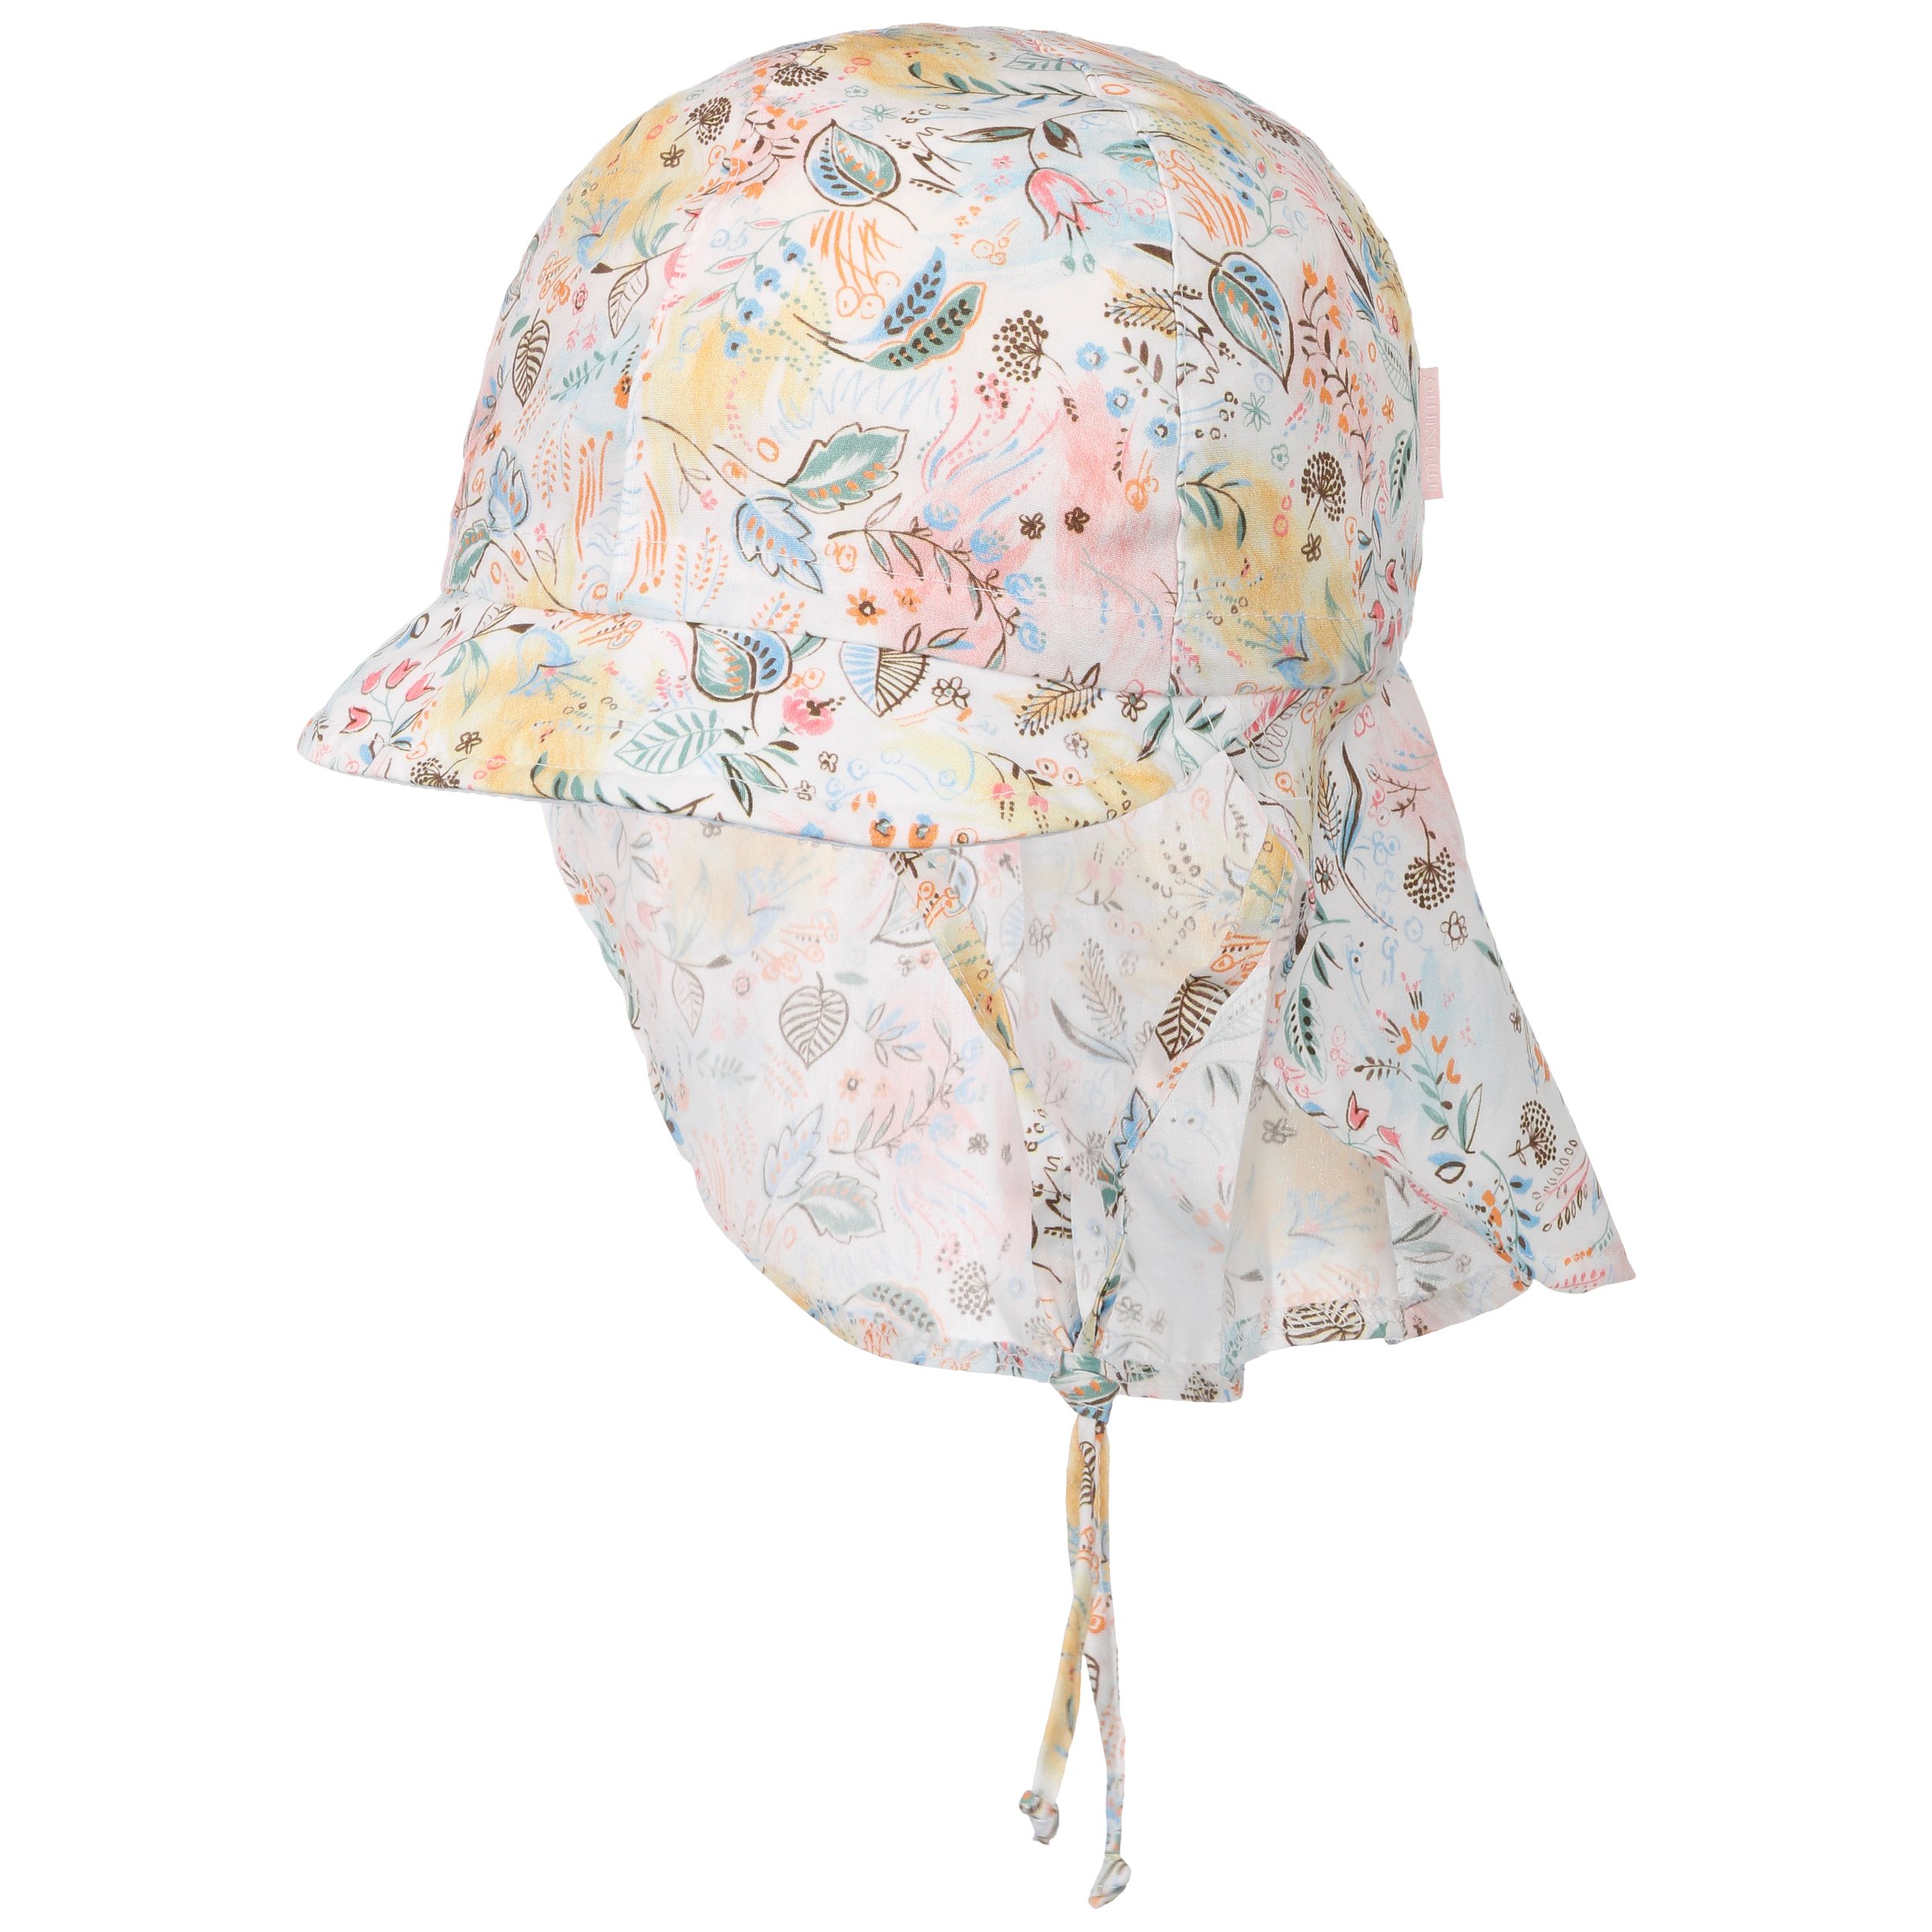 Casquette pour Enfant Mixed Leaves by maximo - 23,95 CHF